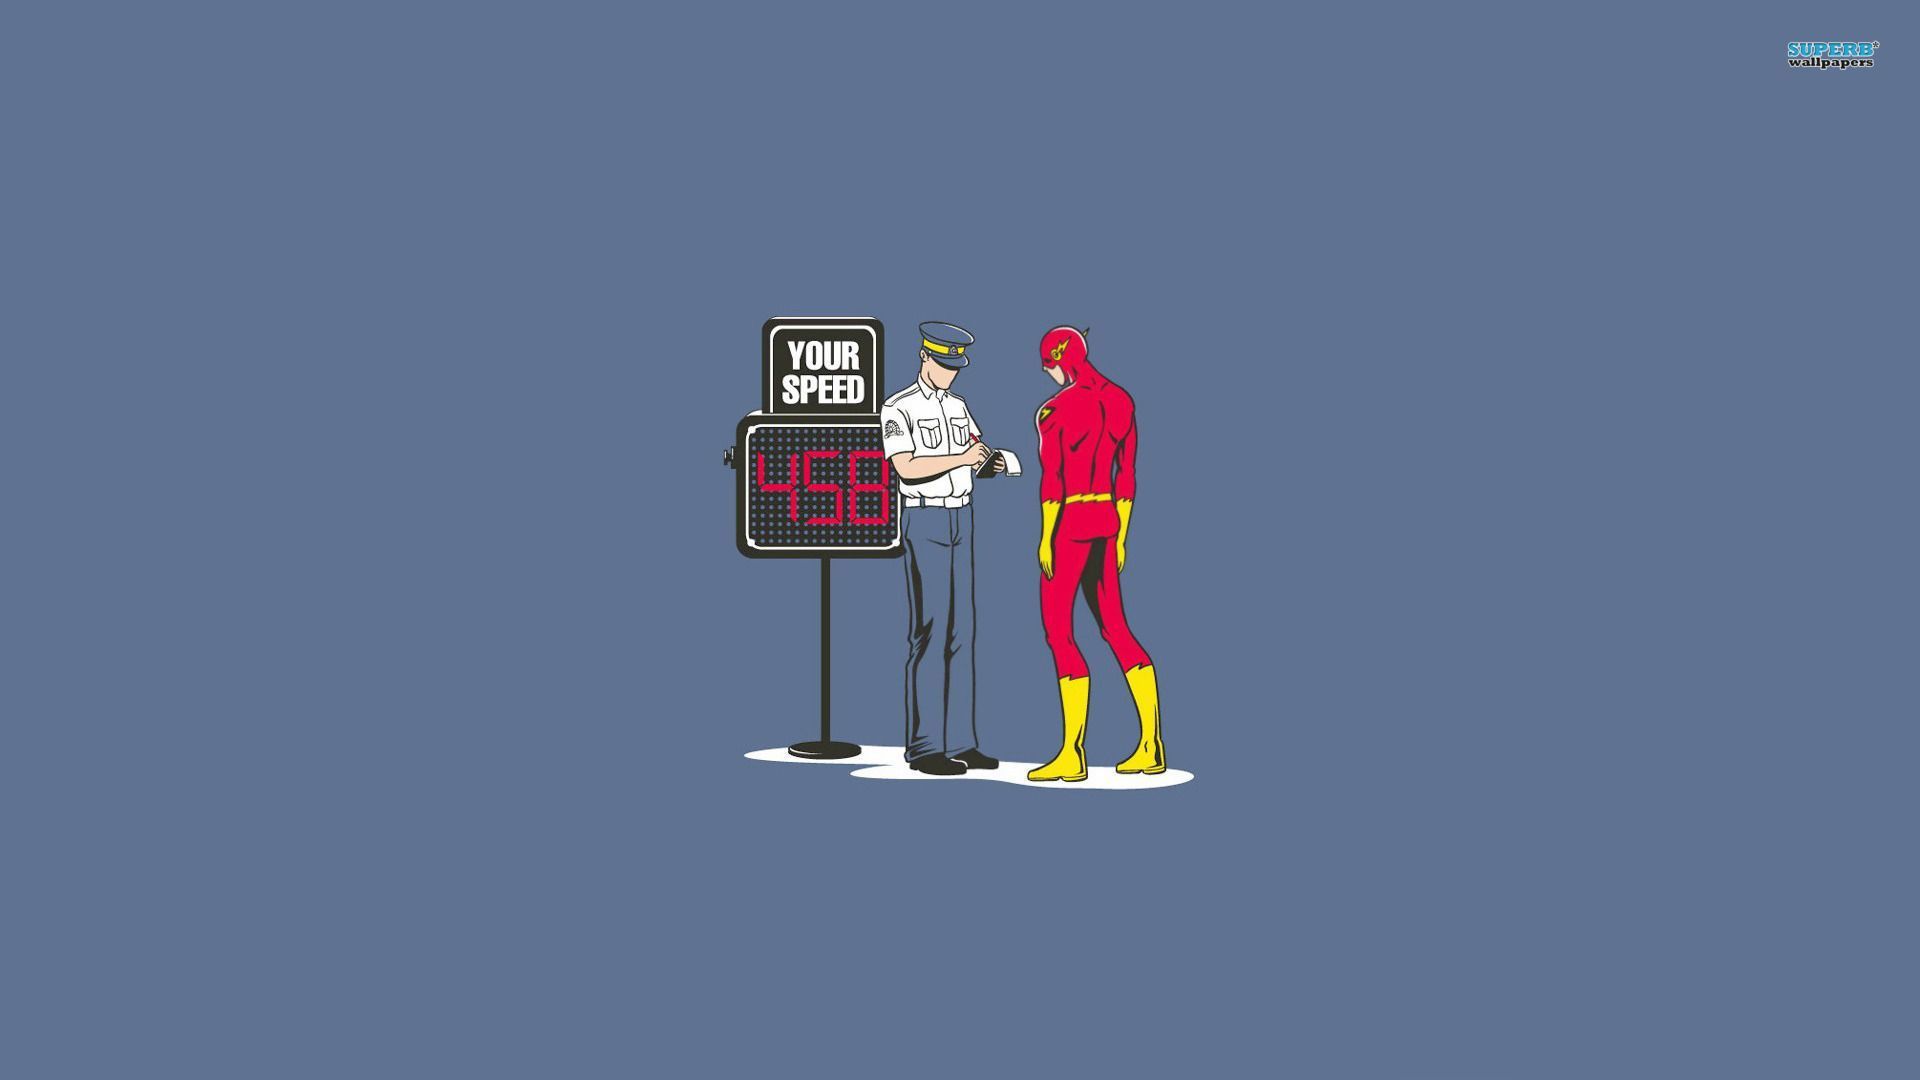 Flash getting a speeding ticket wallpaper - Funny wallpapers - #16346